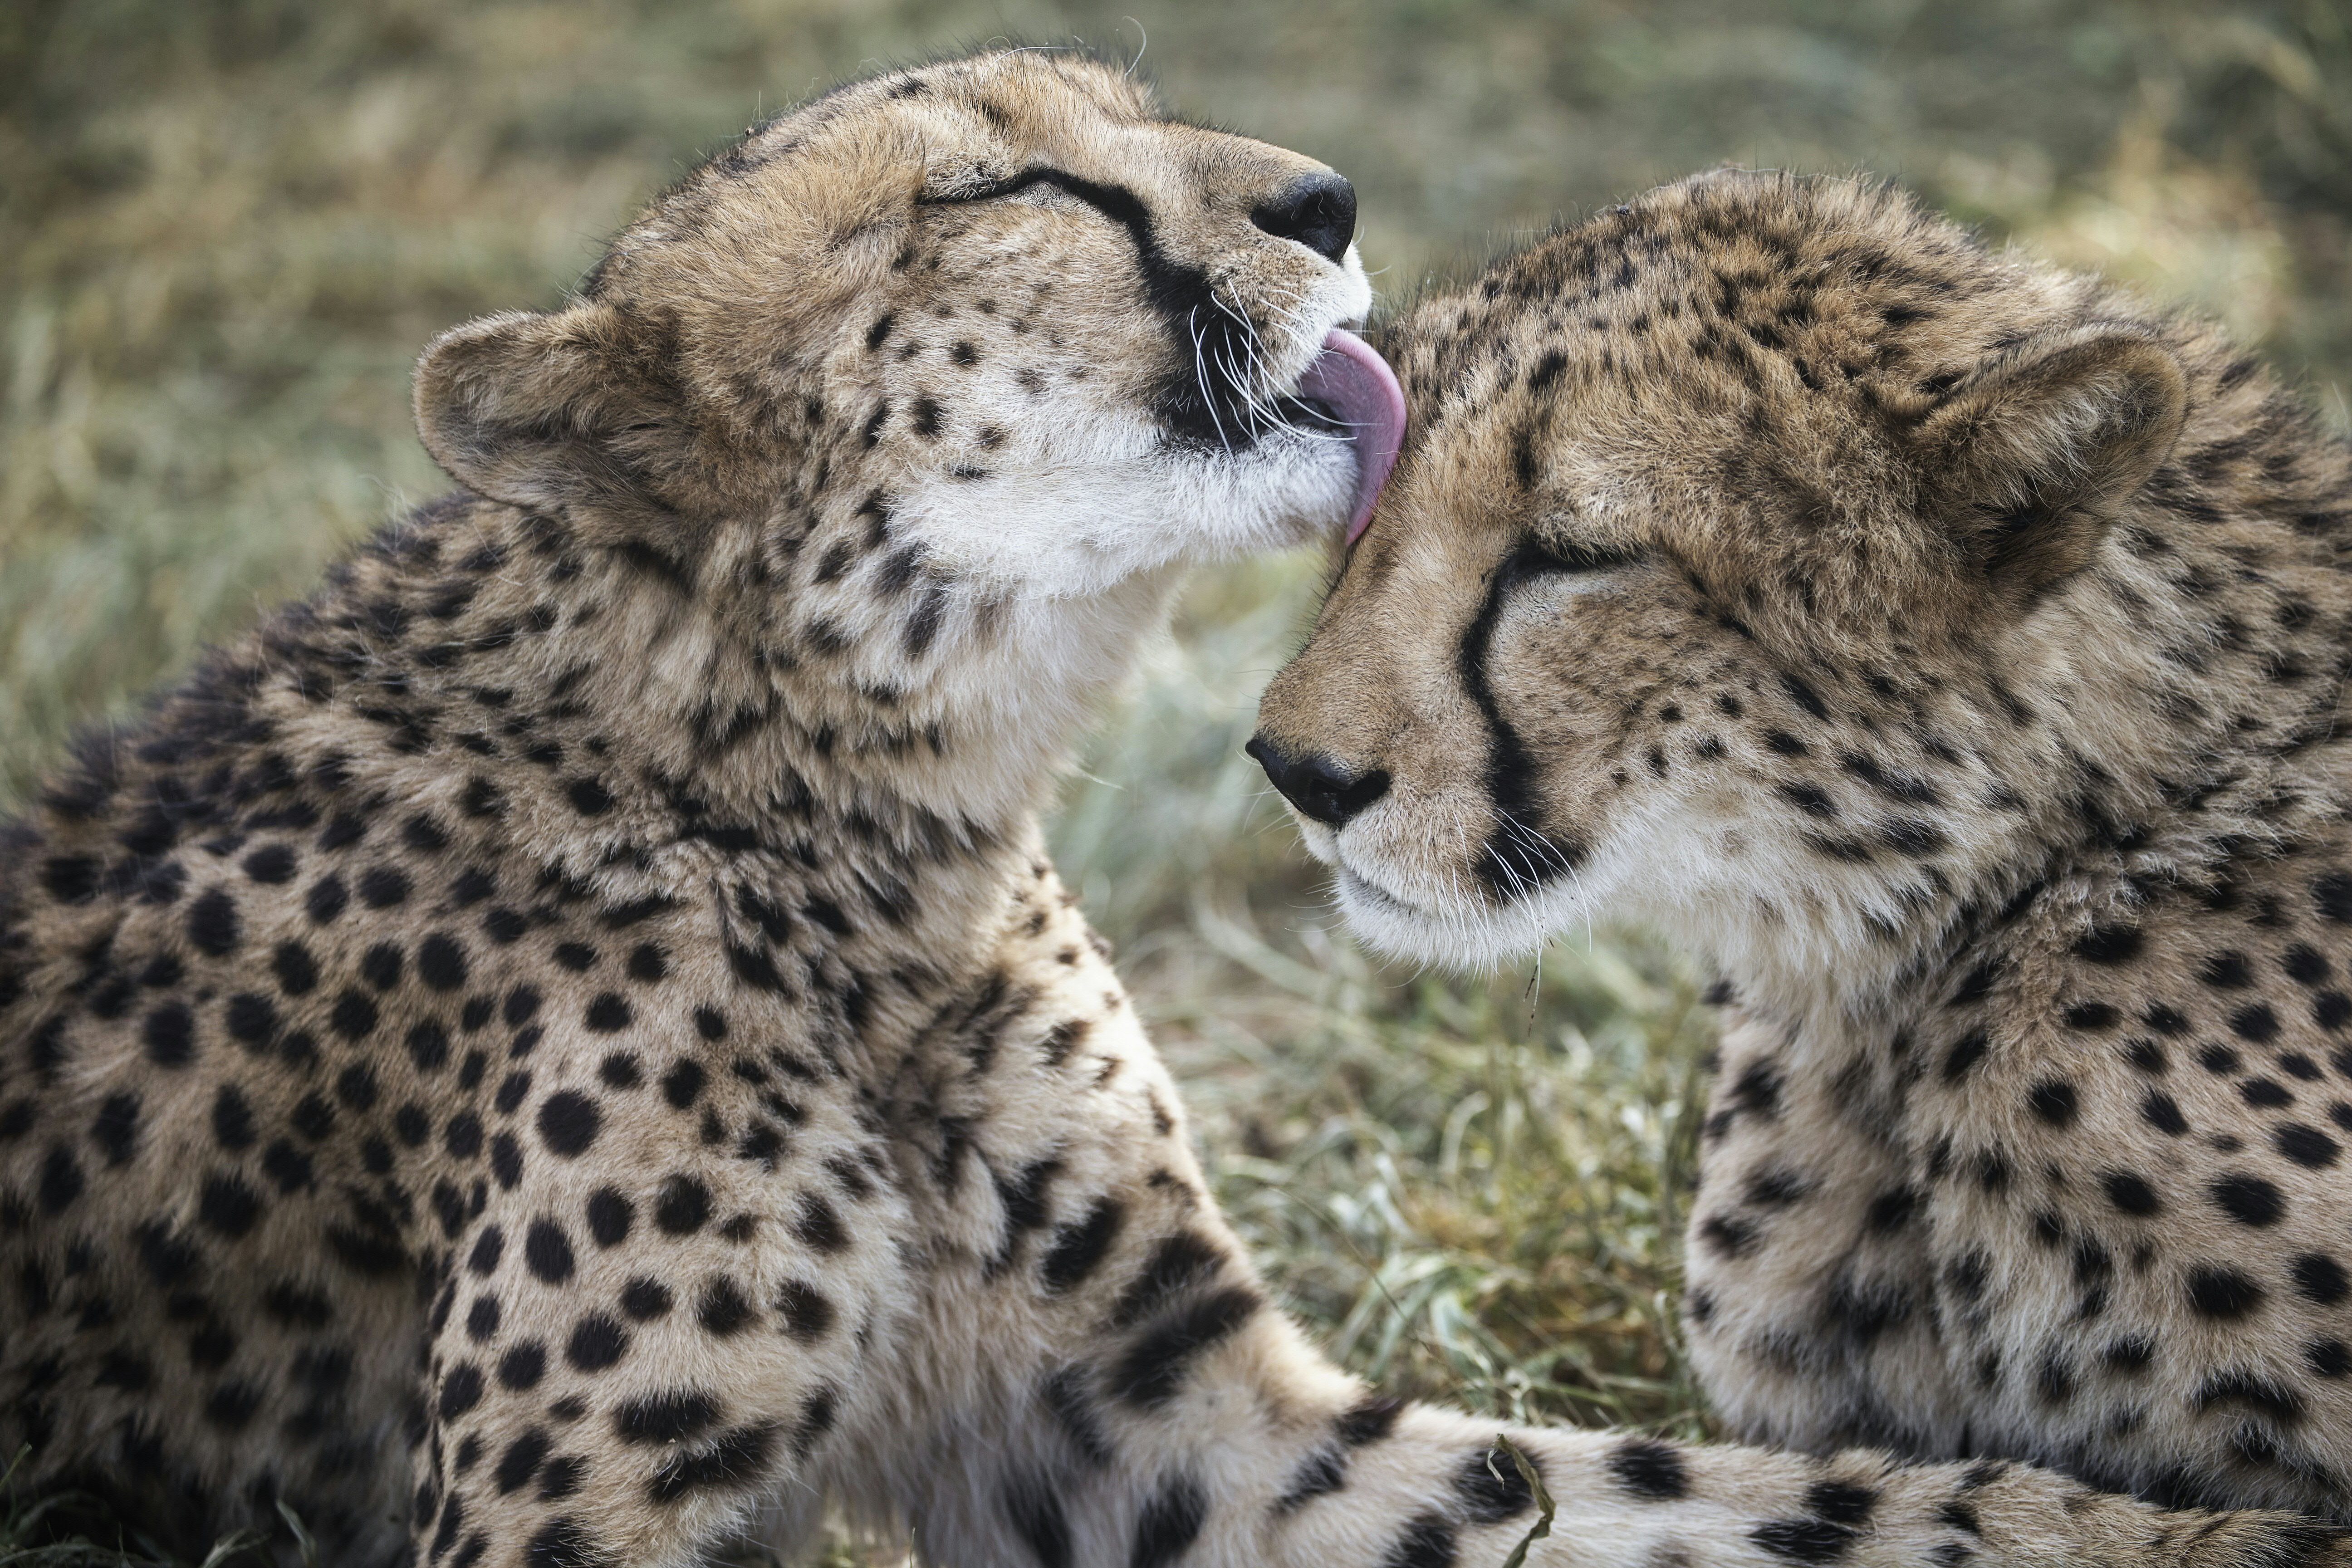 (FILES) This file photo taken on February 18, 2016 shows a captive cheetah licking her sibling in an enclosure at the Cheetah Conservation Fund in Otjiwarongo, Namibia, on February 18, 2016. Cheetahs are "sprinting" to extinction due to habitat loss and other forms of human impact, according to a new study out at the end of December 2016 which called for urgent action to save the world's fastest land animals. / AFP PHOTO / GIANLUIGI GUERCIA